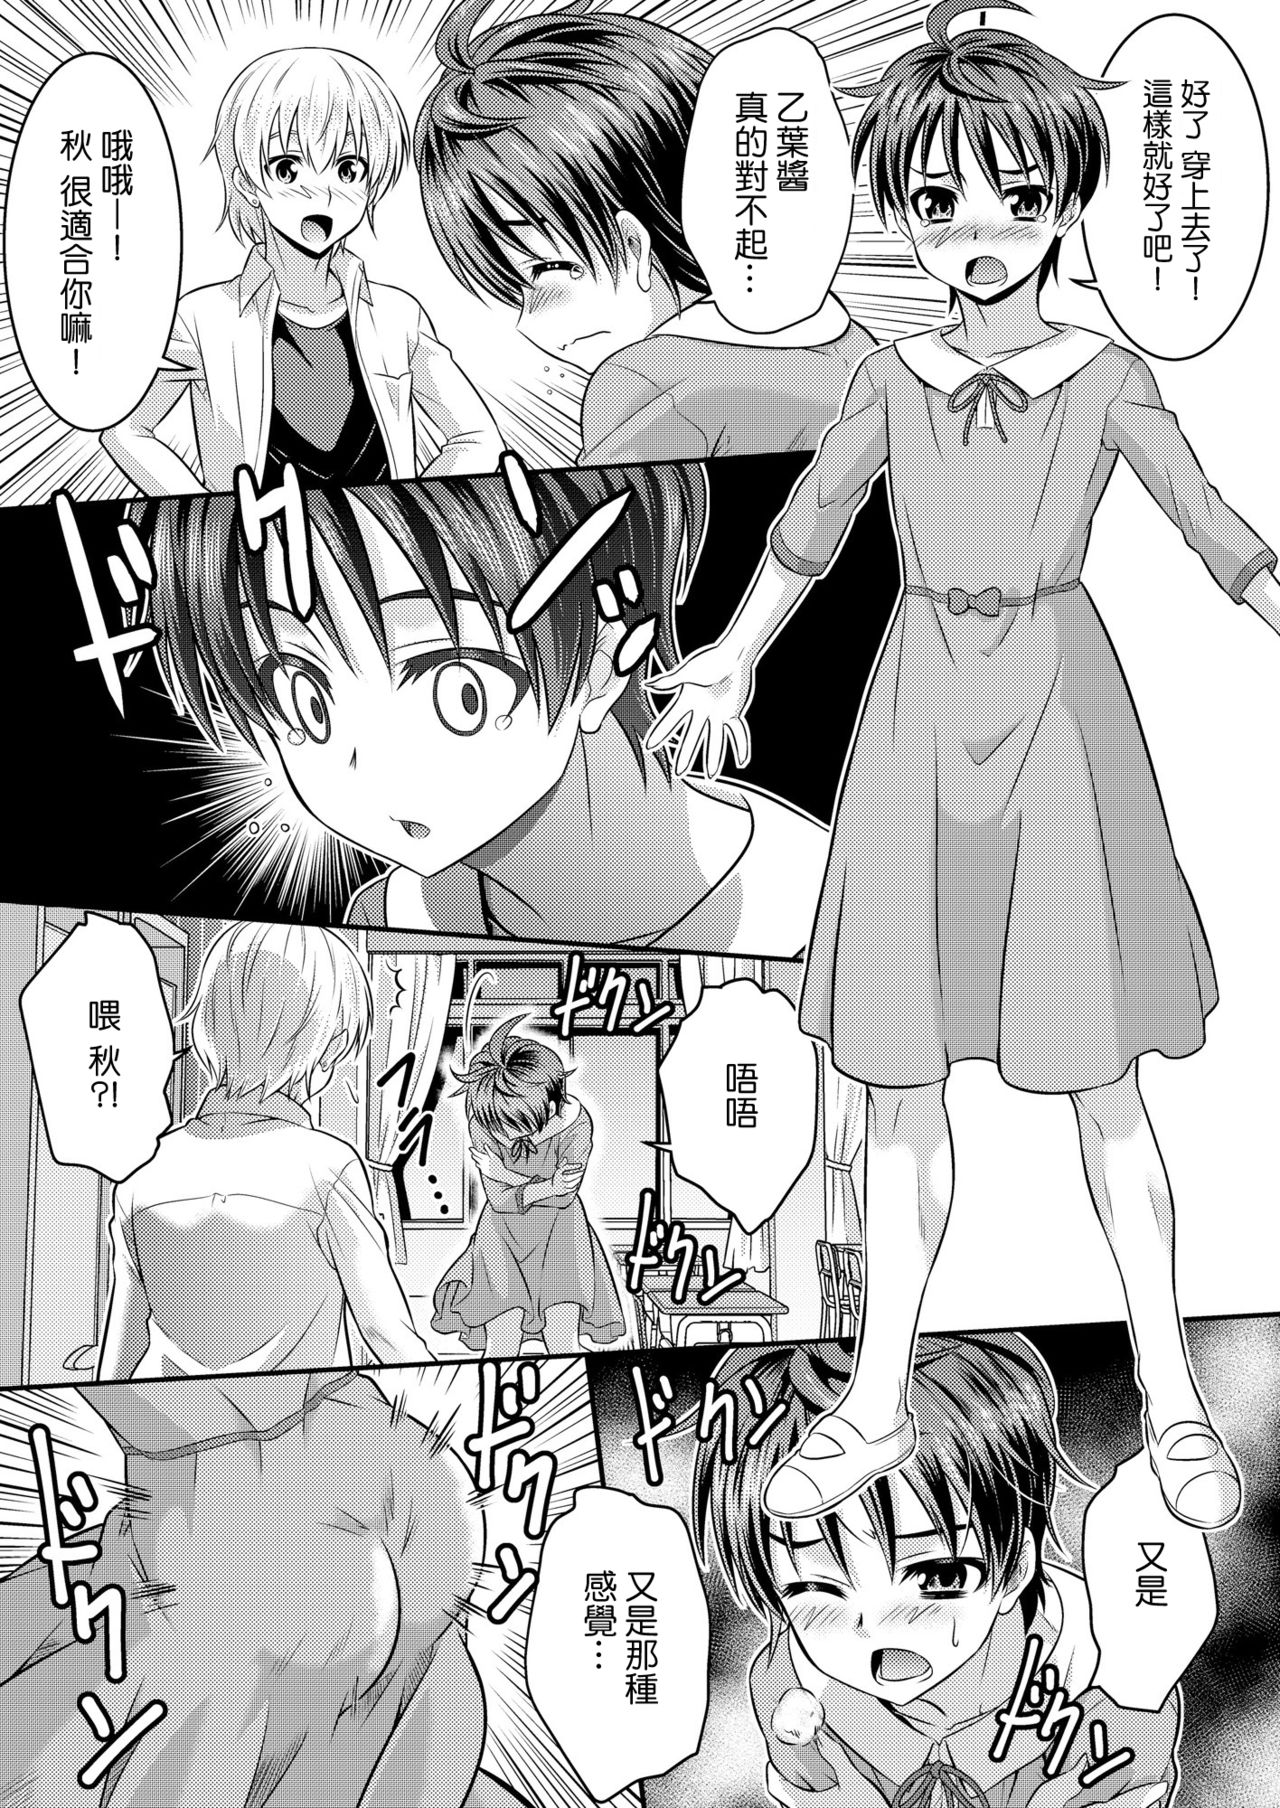 Metamorph ★ Coordination - I Become Whatever Girl I Crossdress As~ [Sister Arc, Classmate Arc] [Chinese] [瑞树汉化组] page 24 full